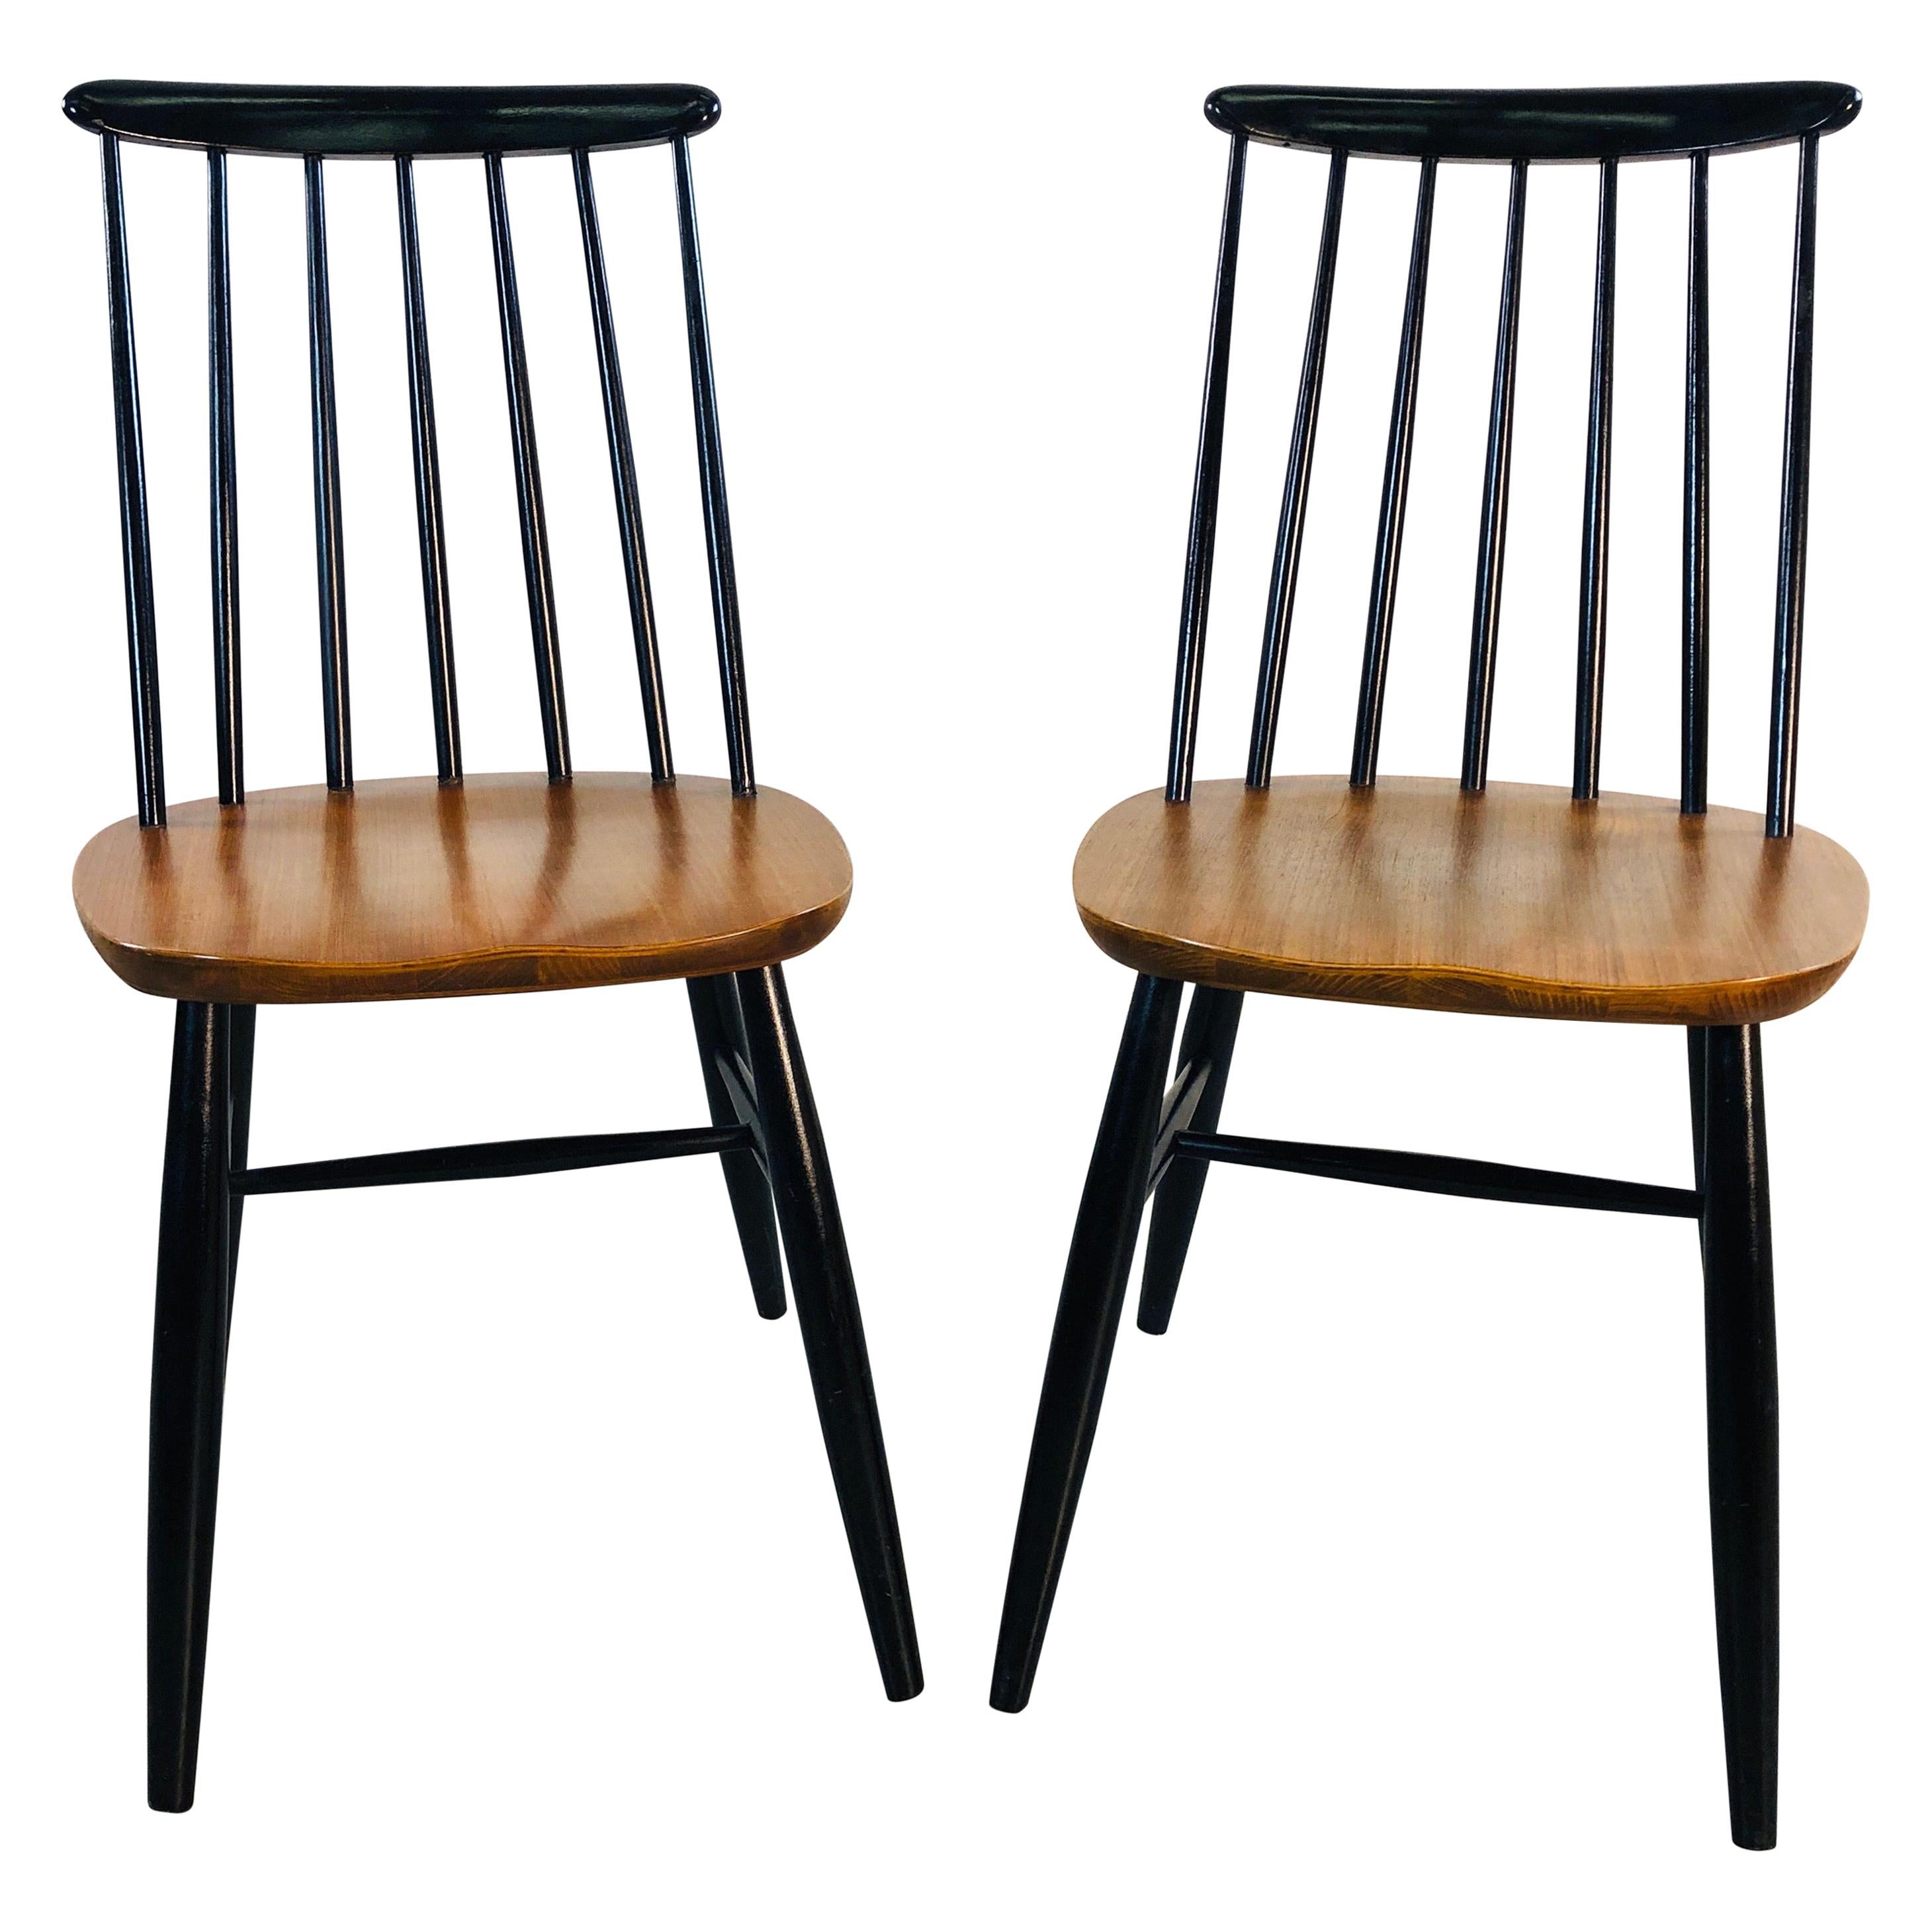 1960s Spindle Back Teak and Black Painted Chairs, Pair For Sale